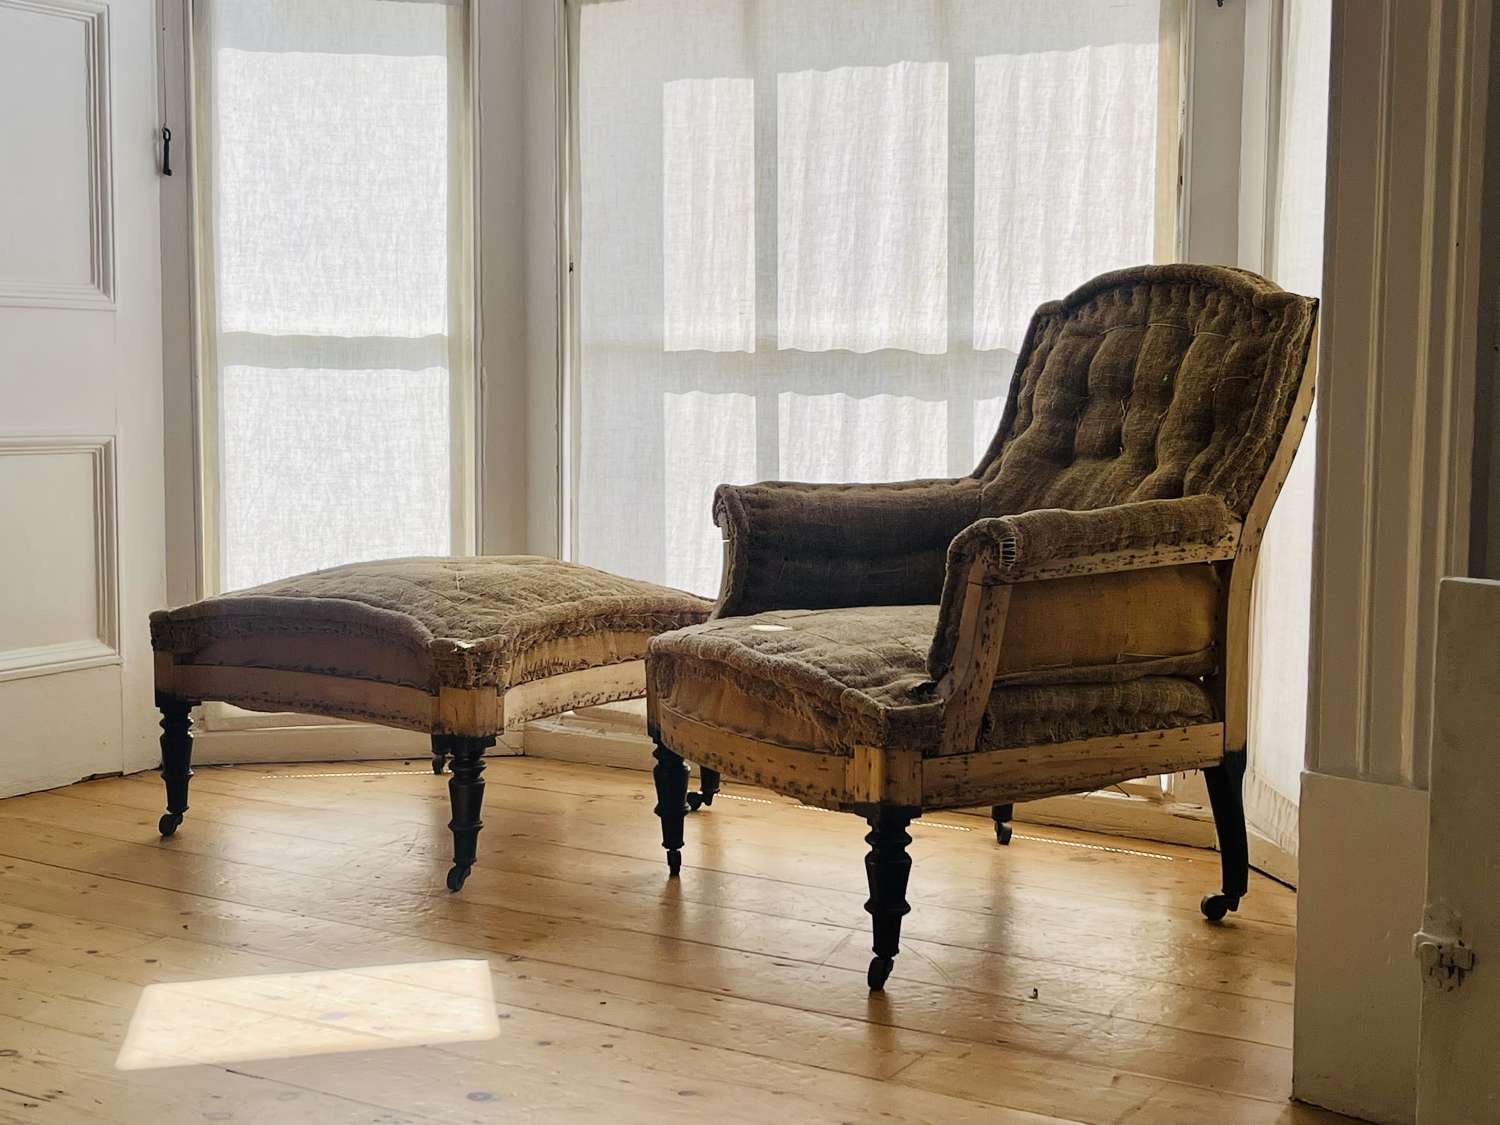 19th Century French hessian armchair and footstool